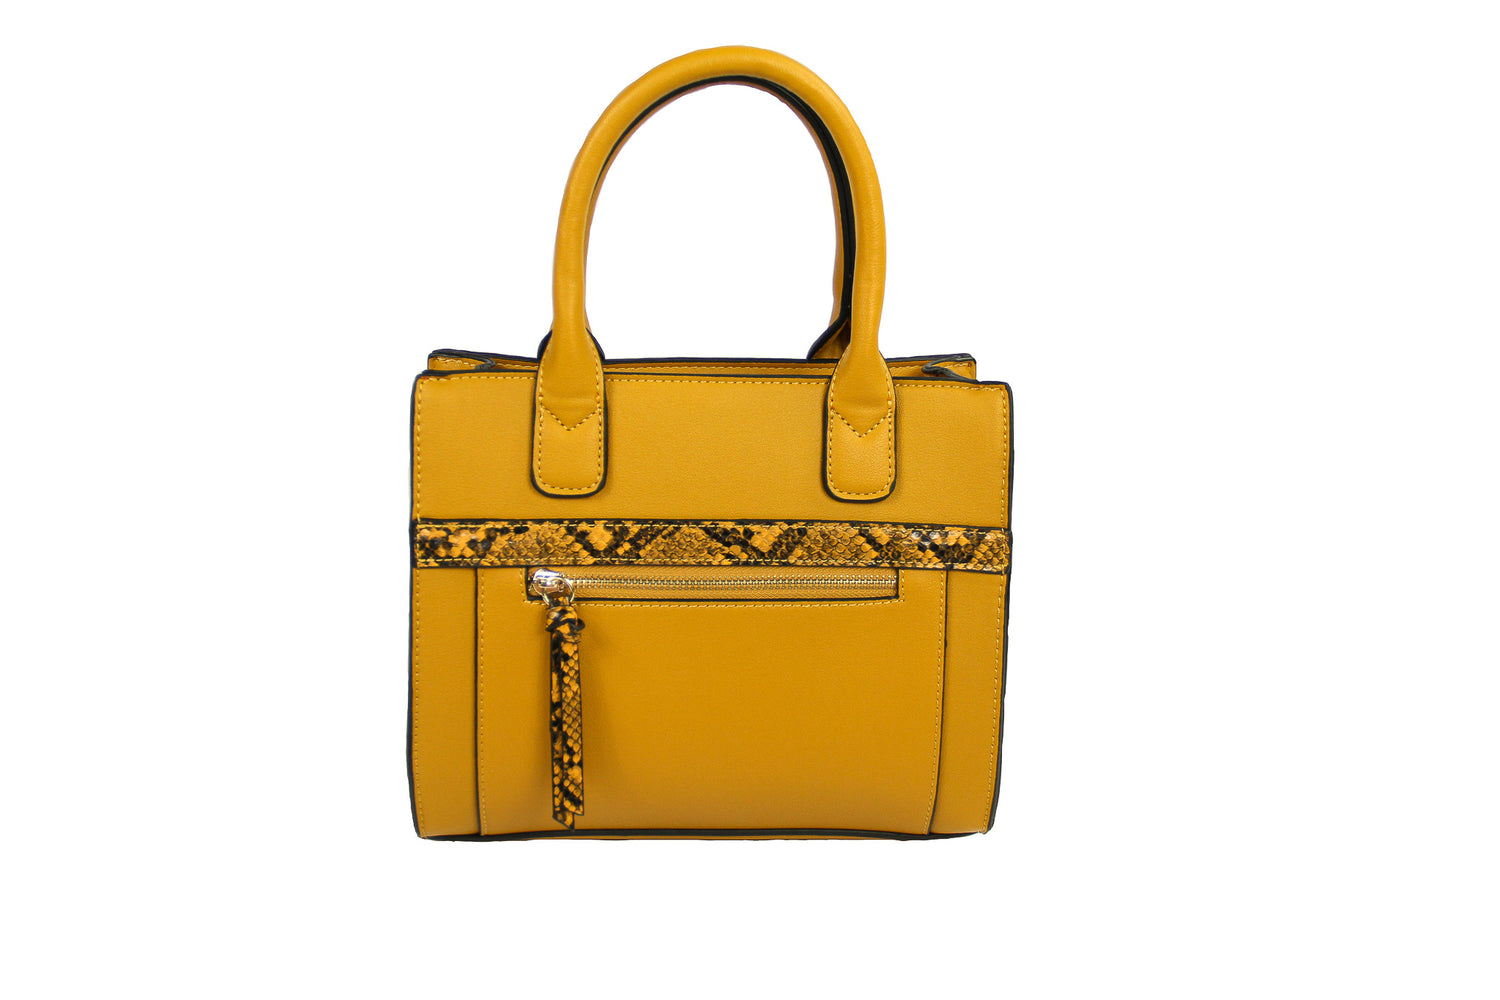 Shop for Mustard High Quality Satchel Handbag with Snake Print Detail. Stylish and Trendy. Includes Removable/Adjustable Straps. Top Handles. Perfect Standout Piece to Complete your Look. Many more styles at LAZO CHIC 